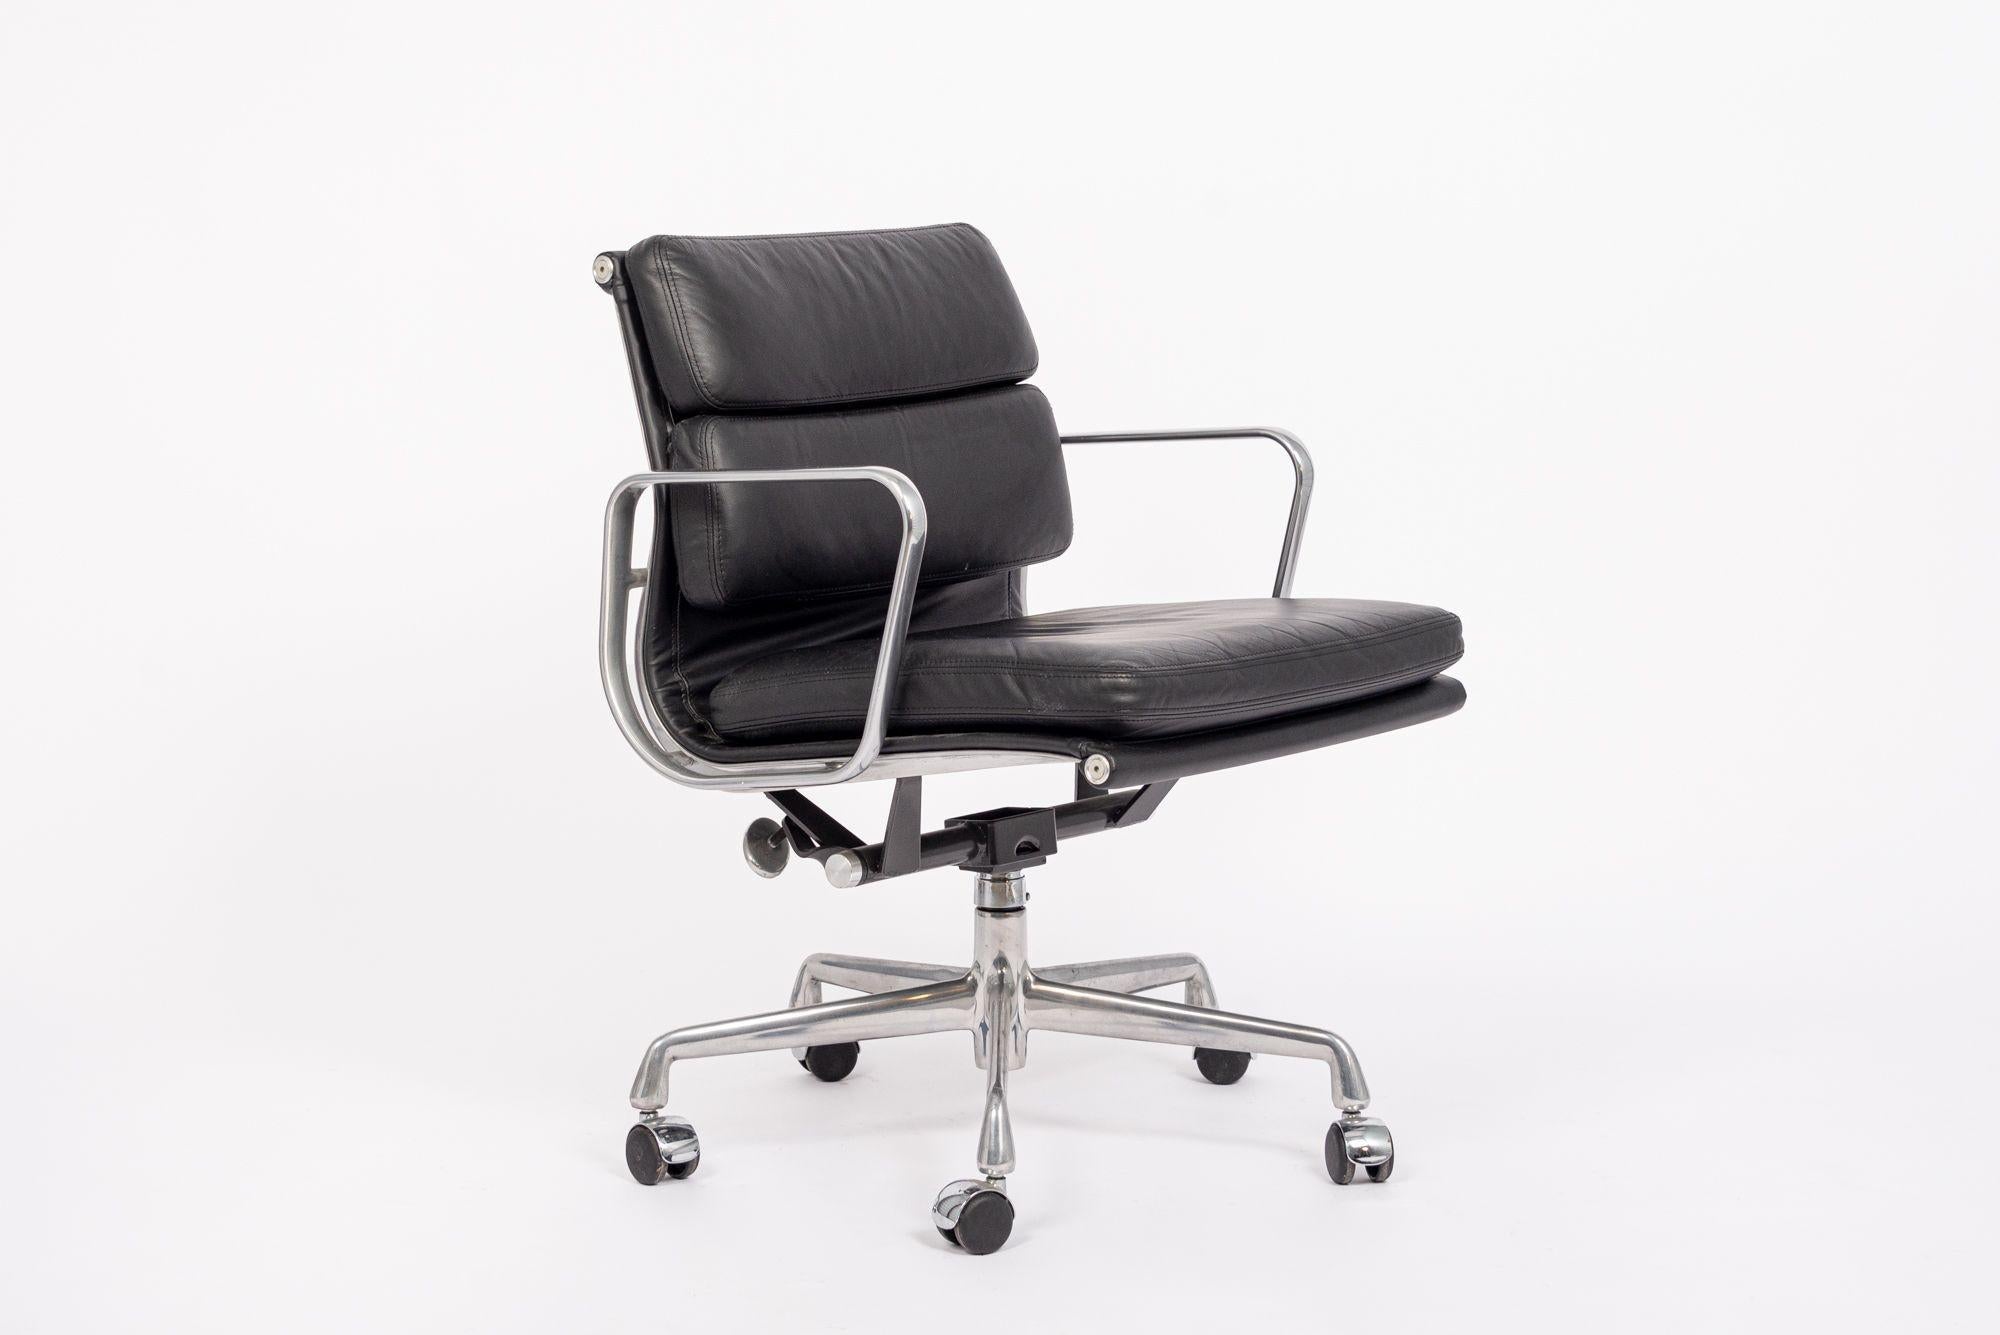 This authentic Eames for Herman Miller Soft Pad Management Height black leather office chair from the Aluminum Group Collection was manufactured in the 2001. This classic mid century modern office chair was first introduced in 1969 by Charles and